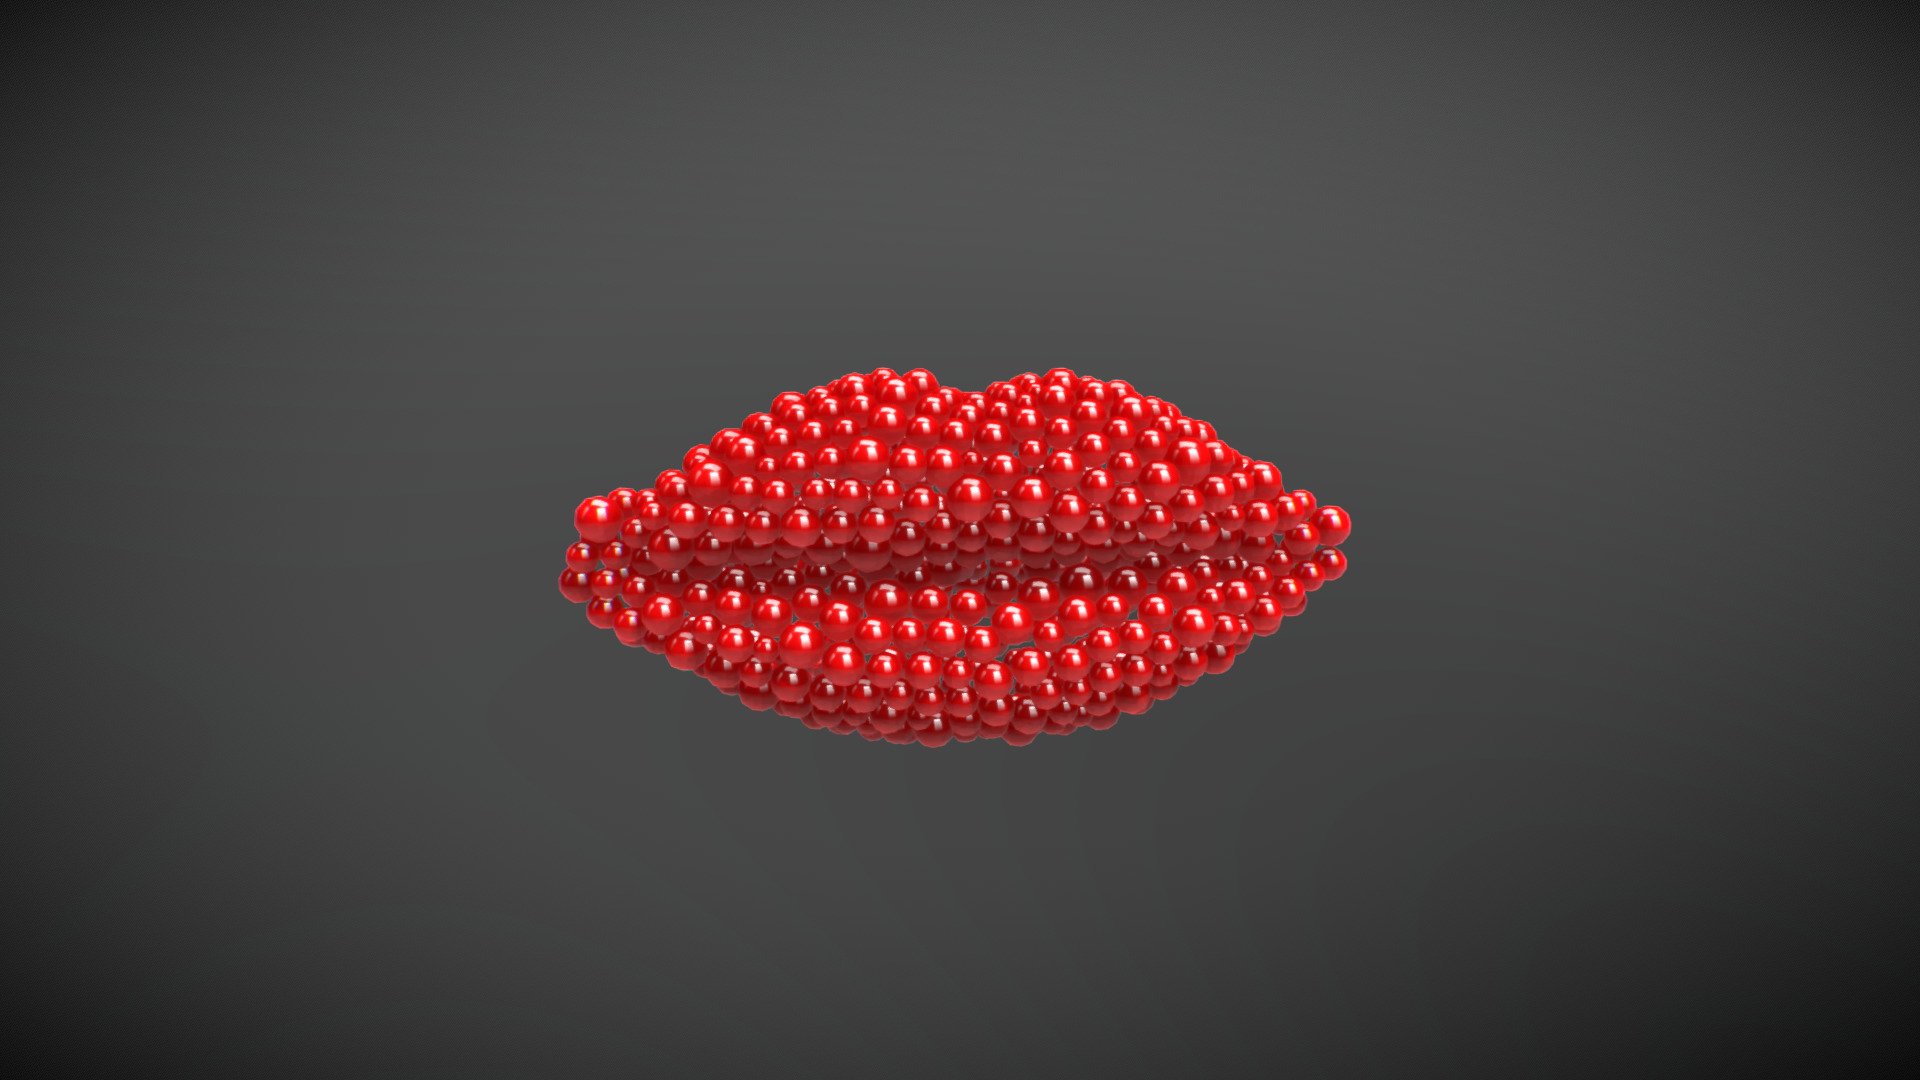 Lips shape made out of shiny spheres. Baked keyframed animation 3d model